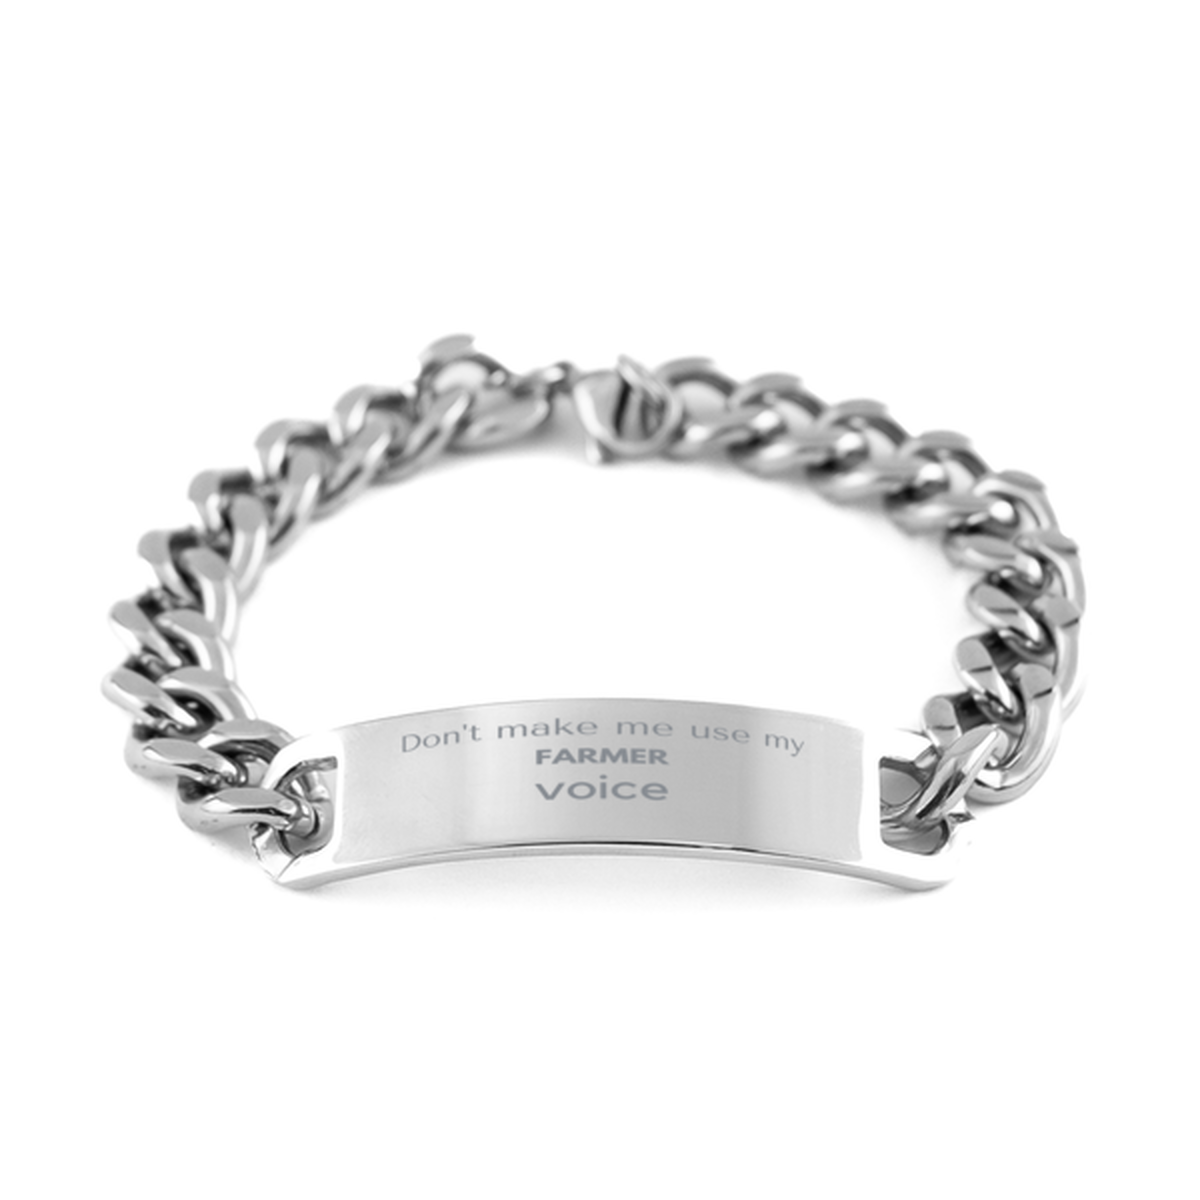 Don't make me use my Farmer voice, Sarcasm Farmer Gifts, Christmas Farmer Cuban Chain Stainless Steel Bracelet Birthday Unique Gifts For Farmer Coworkers, Men, Women, Colleague, Friends